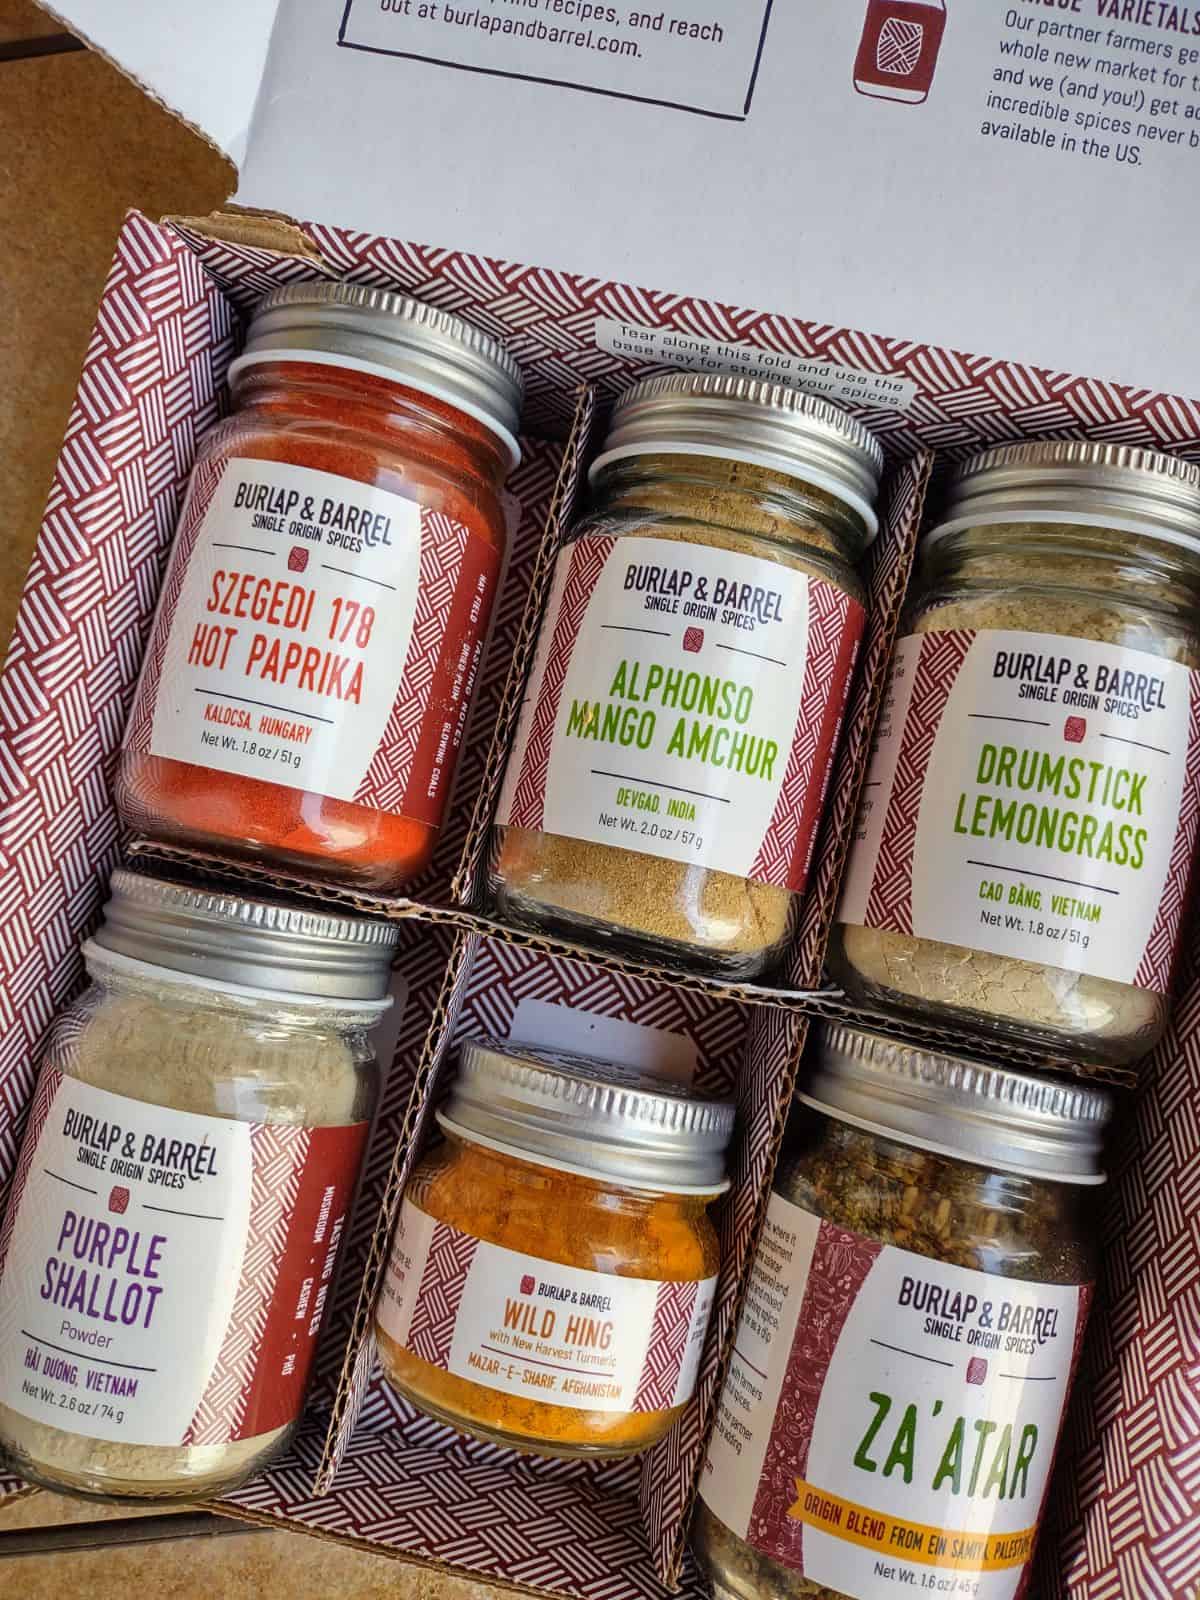 6 Jars of Burlap & Barrel spices in a box